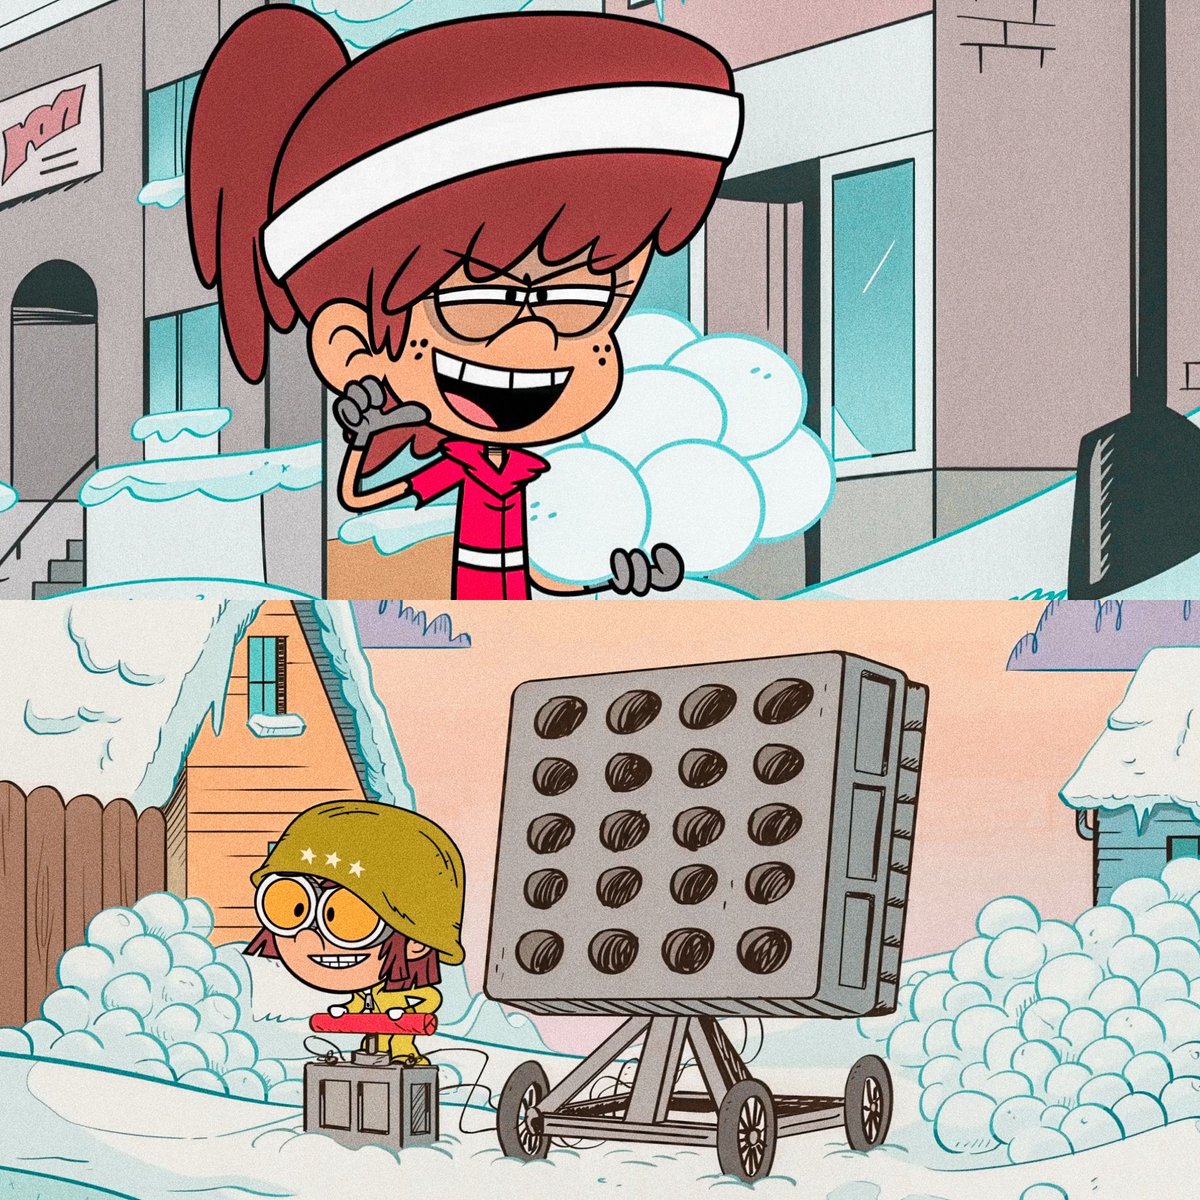 Lynn & Lisa : Playing in snowball! Two shot on Loud's family! #theloudhouse #TheLoudHousefanart #lynnloud #lisaloud